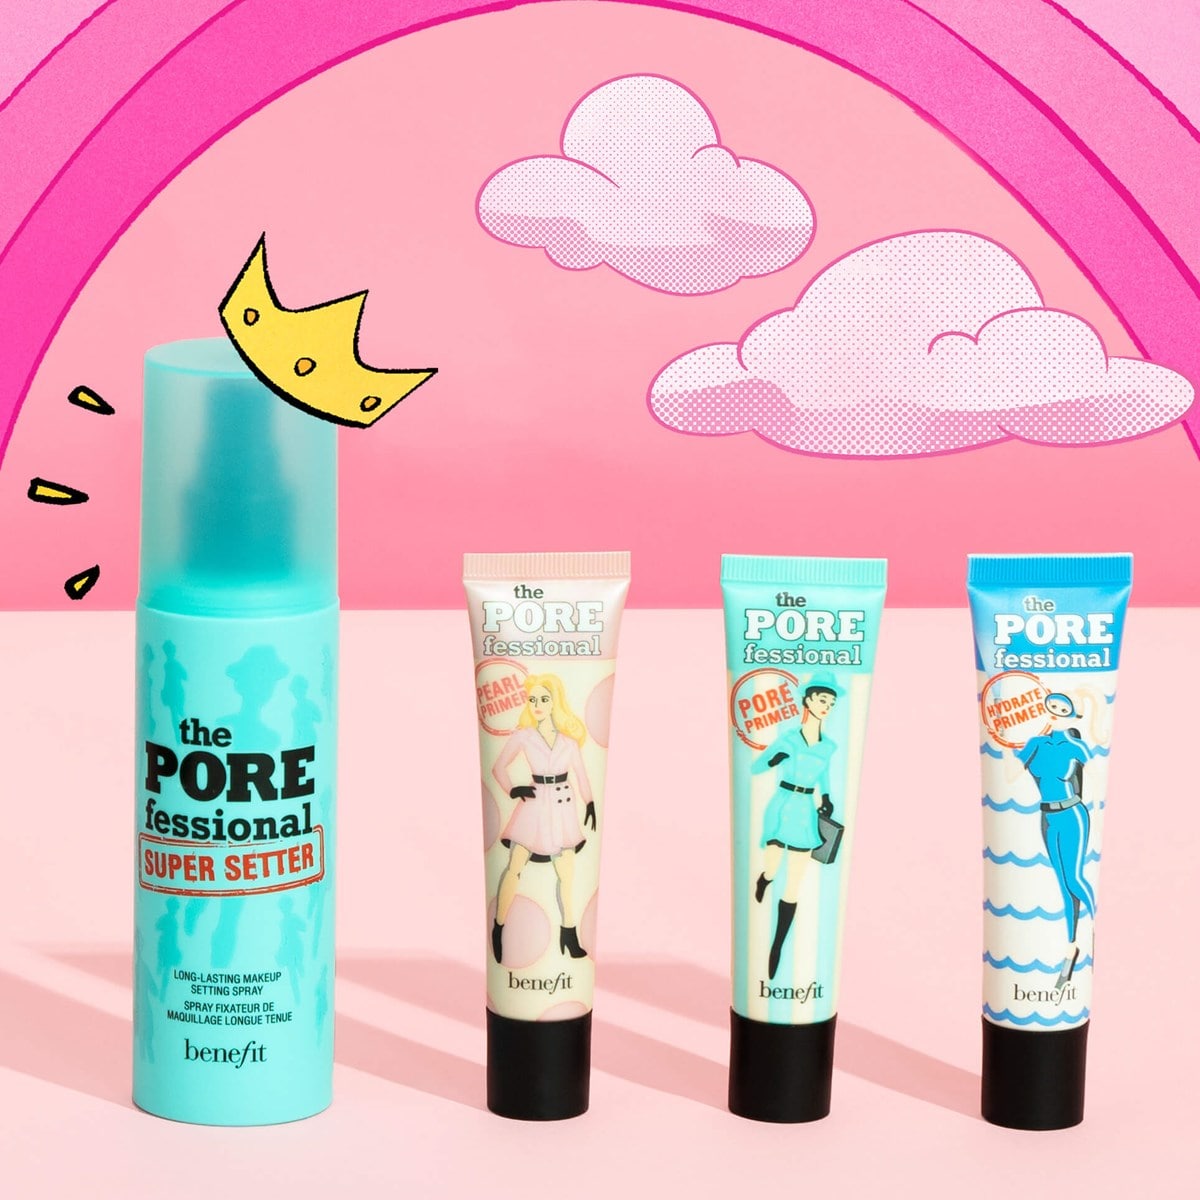 The POREfessional: Super Setter Long-lasting makeup setting spray Mini size for Travel by Benefit